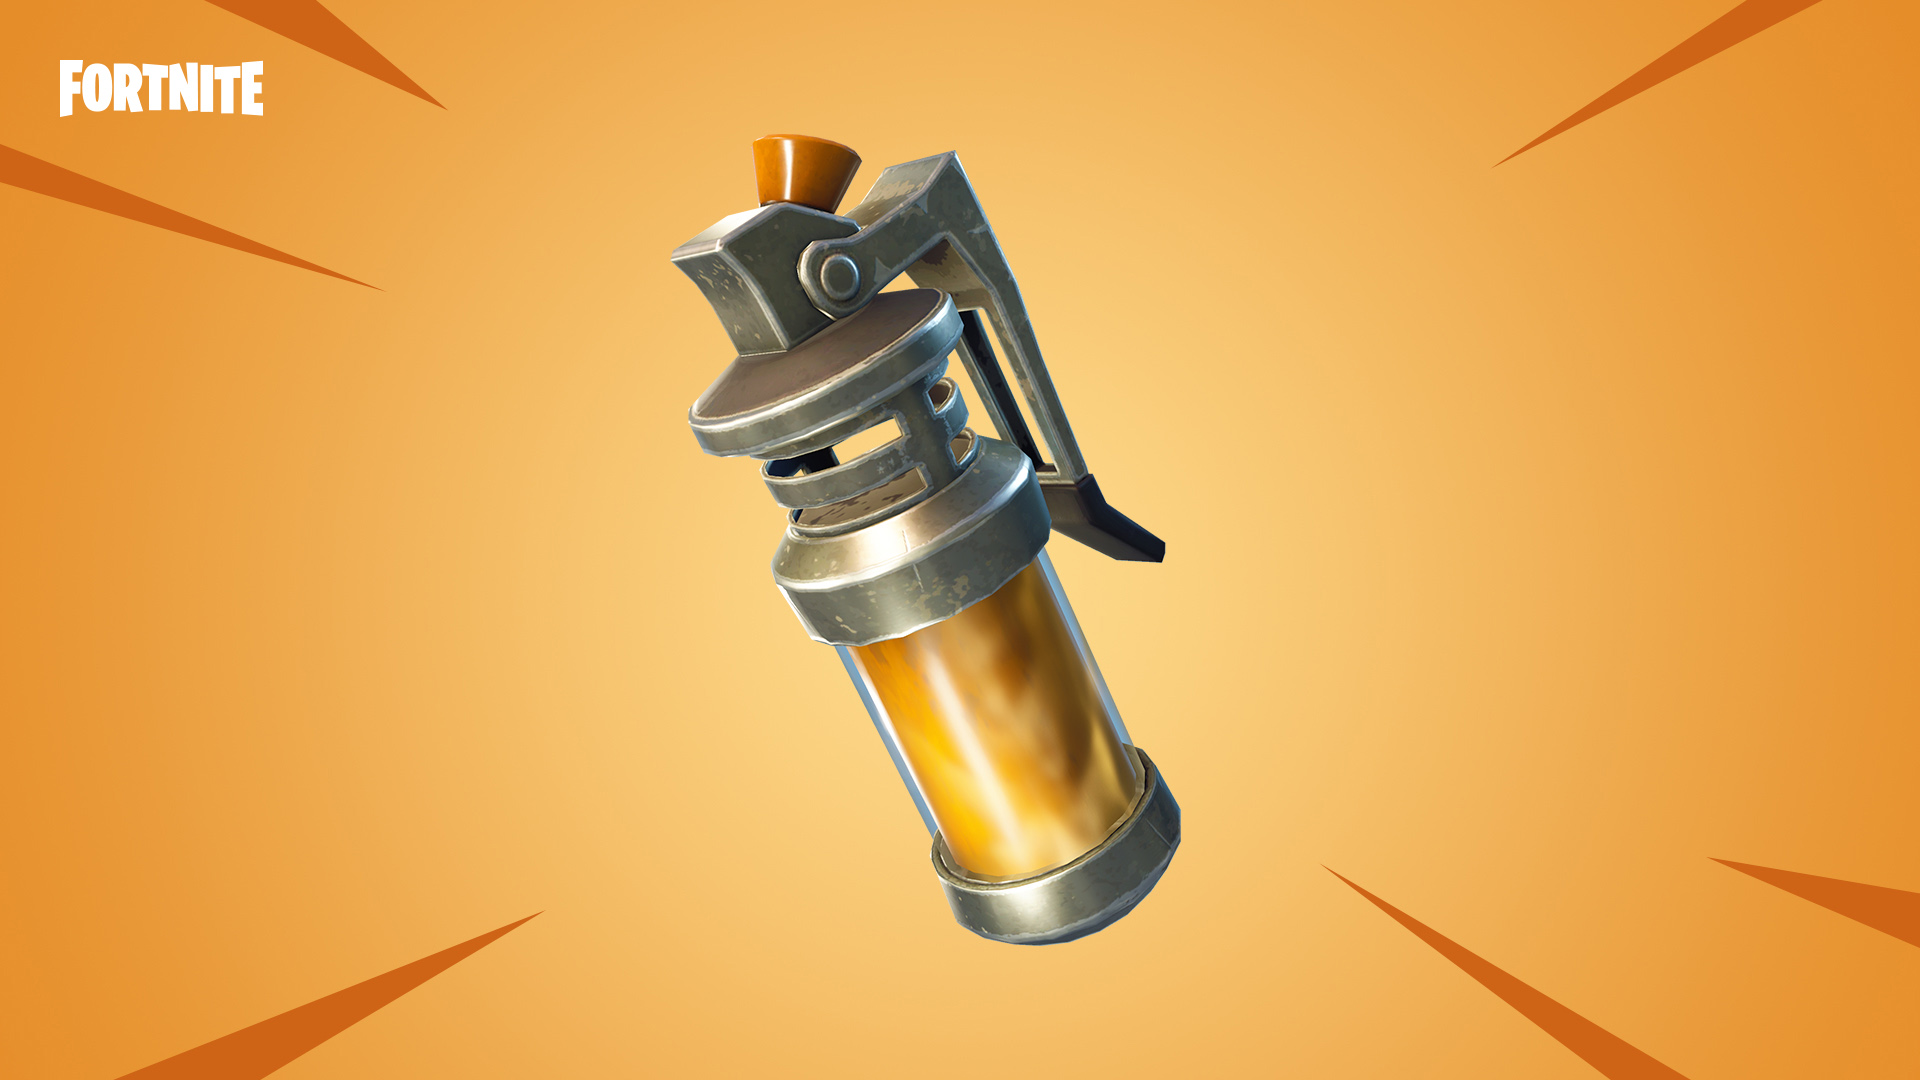 Fortnite'S Newest Content Update Makes Way For The Stink Bomb